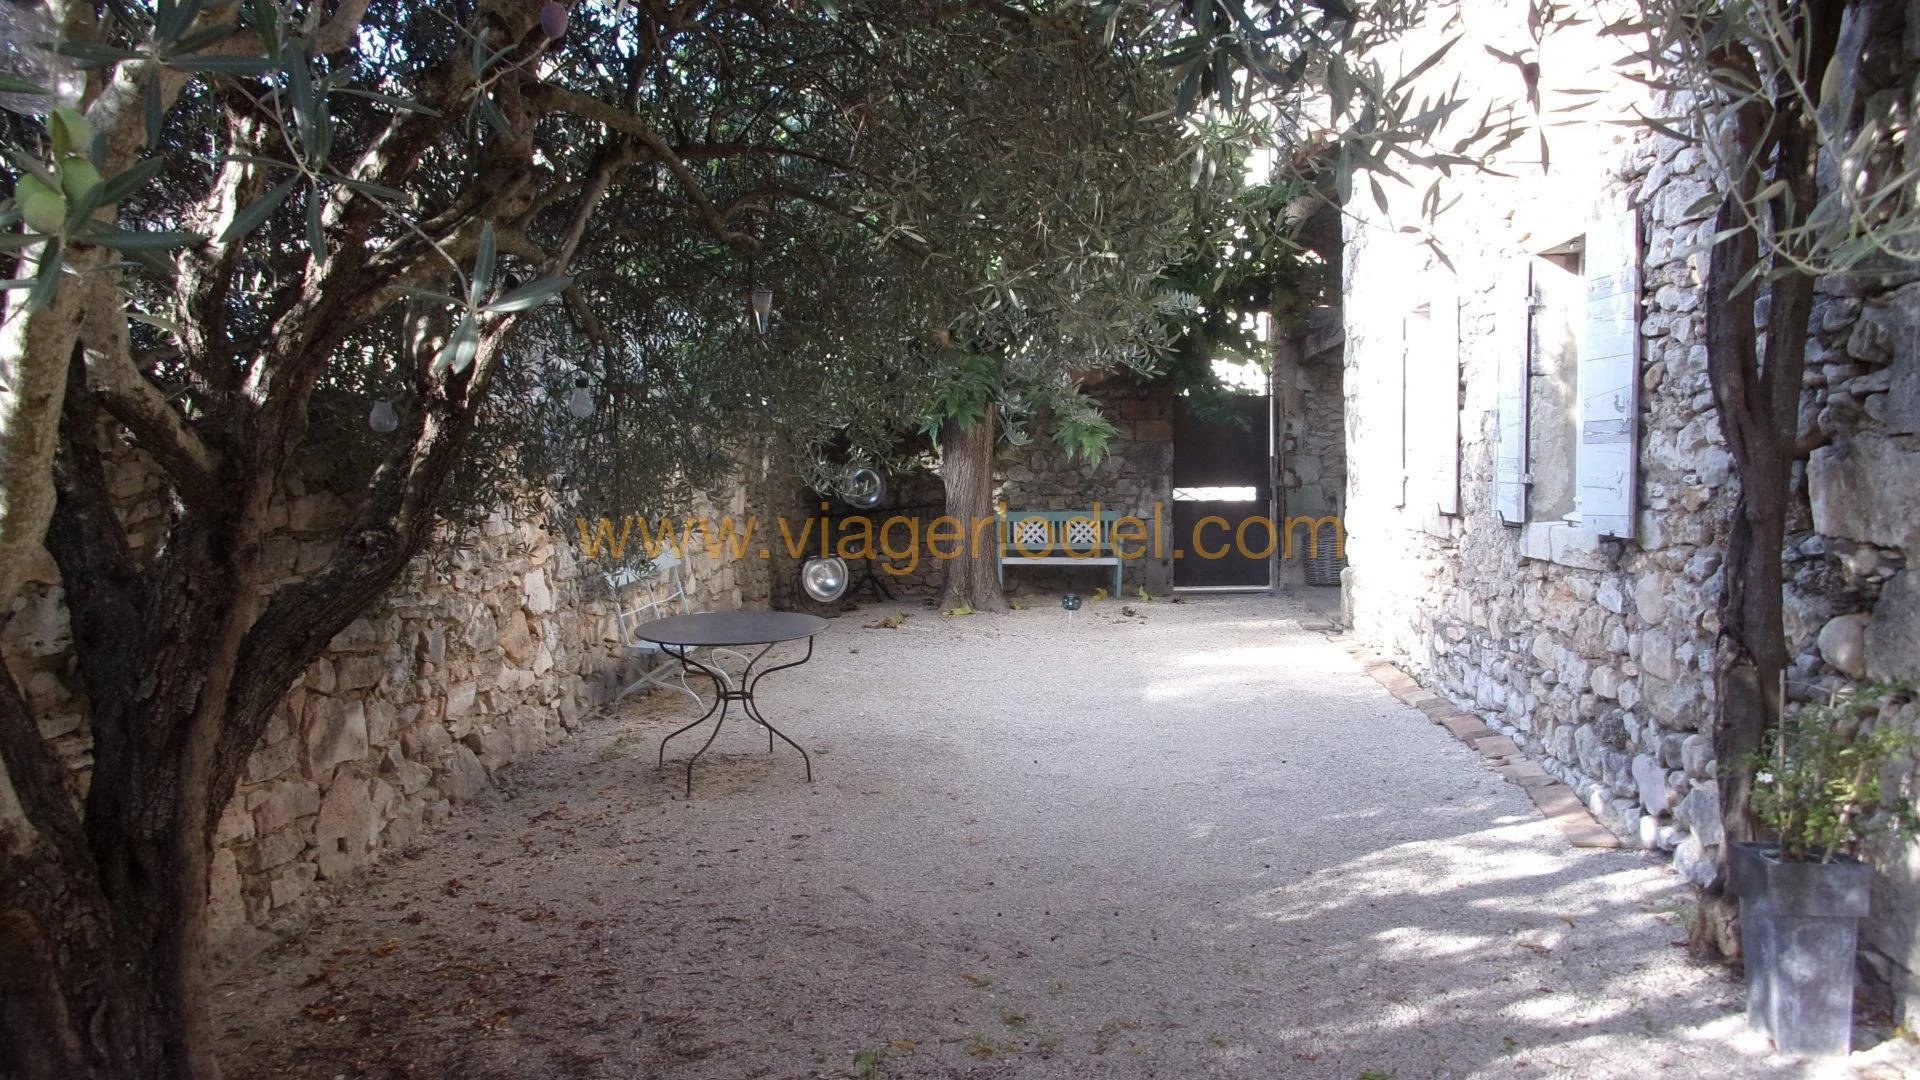 Ref.: 9060 - BARE OWNERSHIP - GOUDARGUES (30) - Occupied house